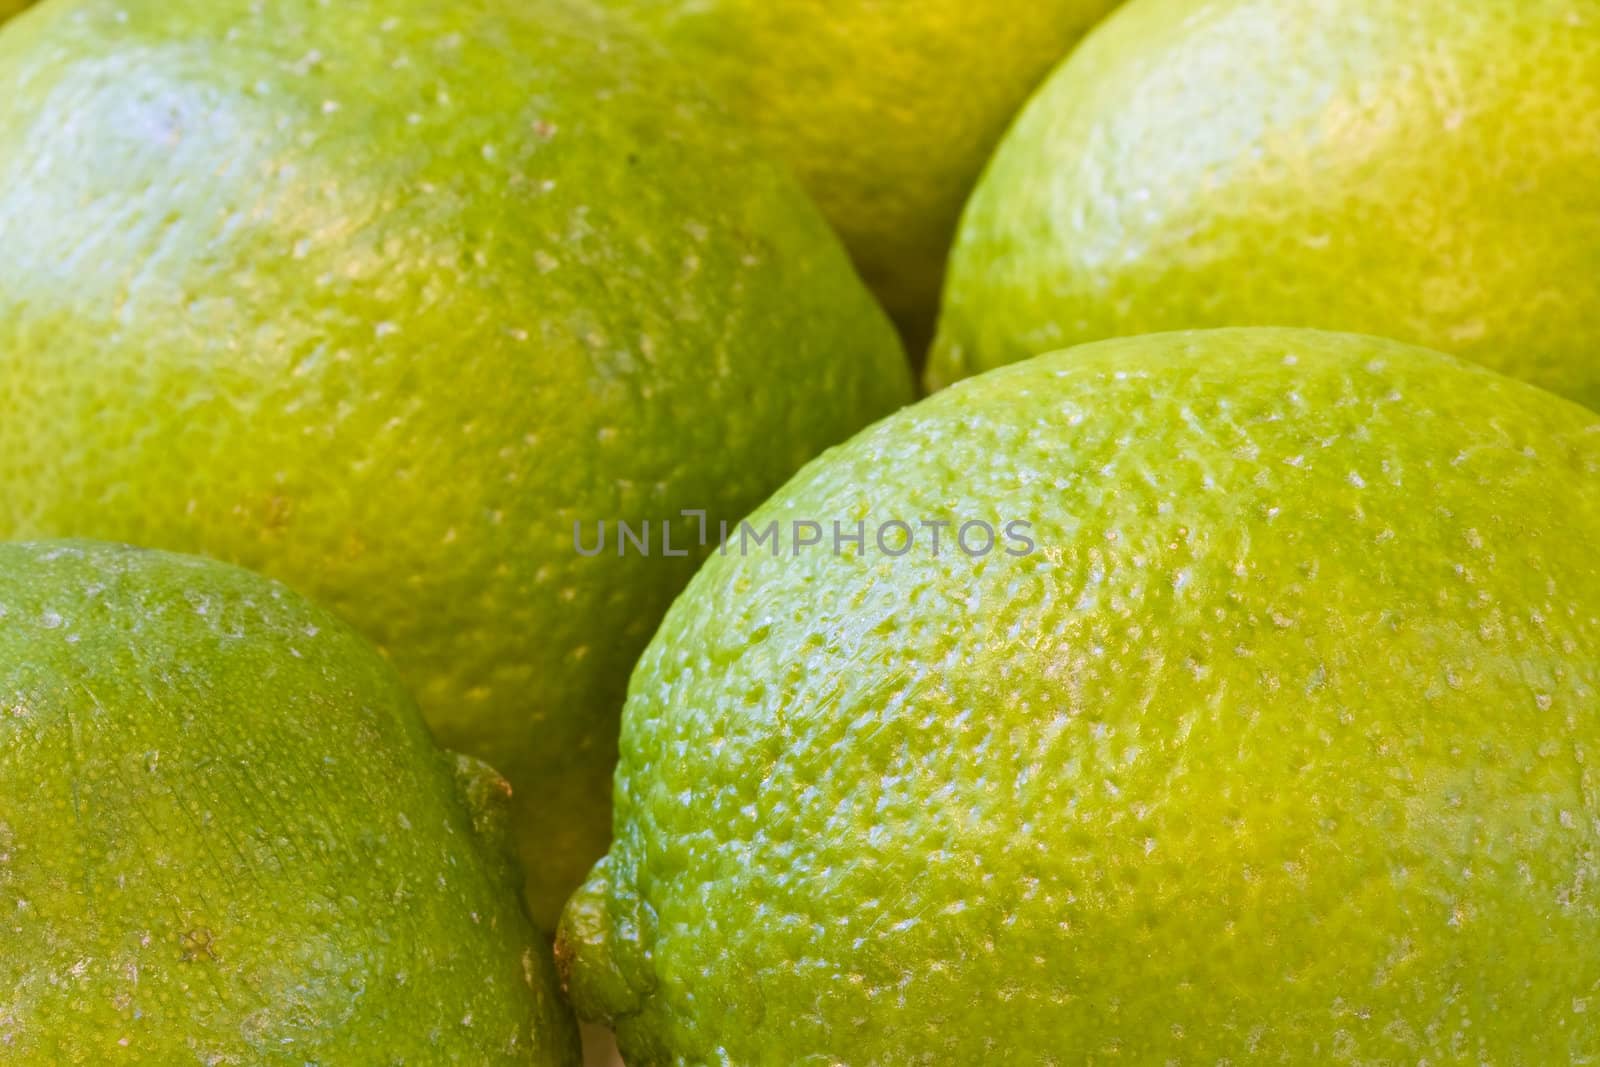 a bunch of limes shot close up